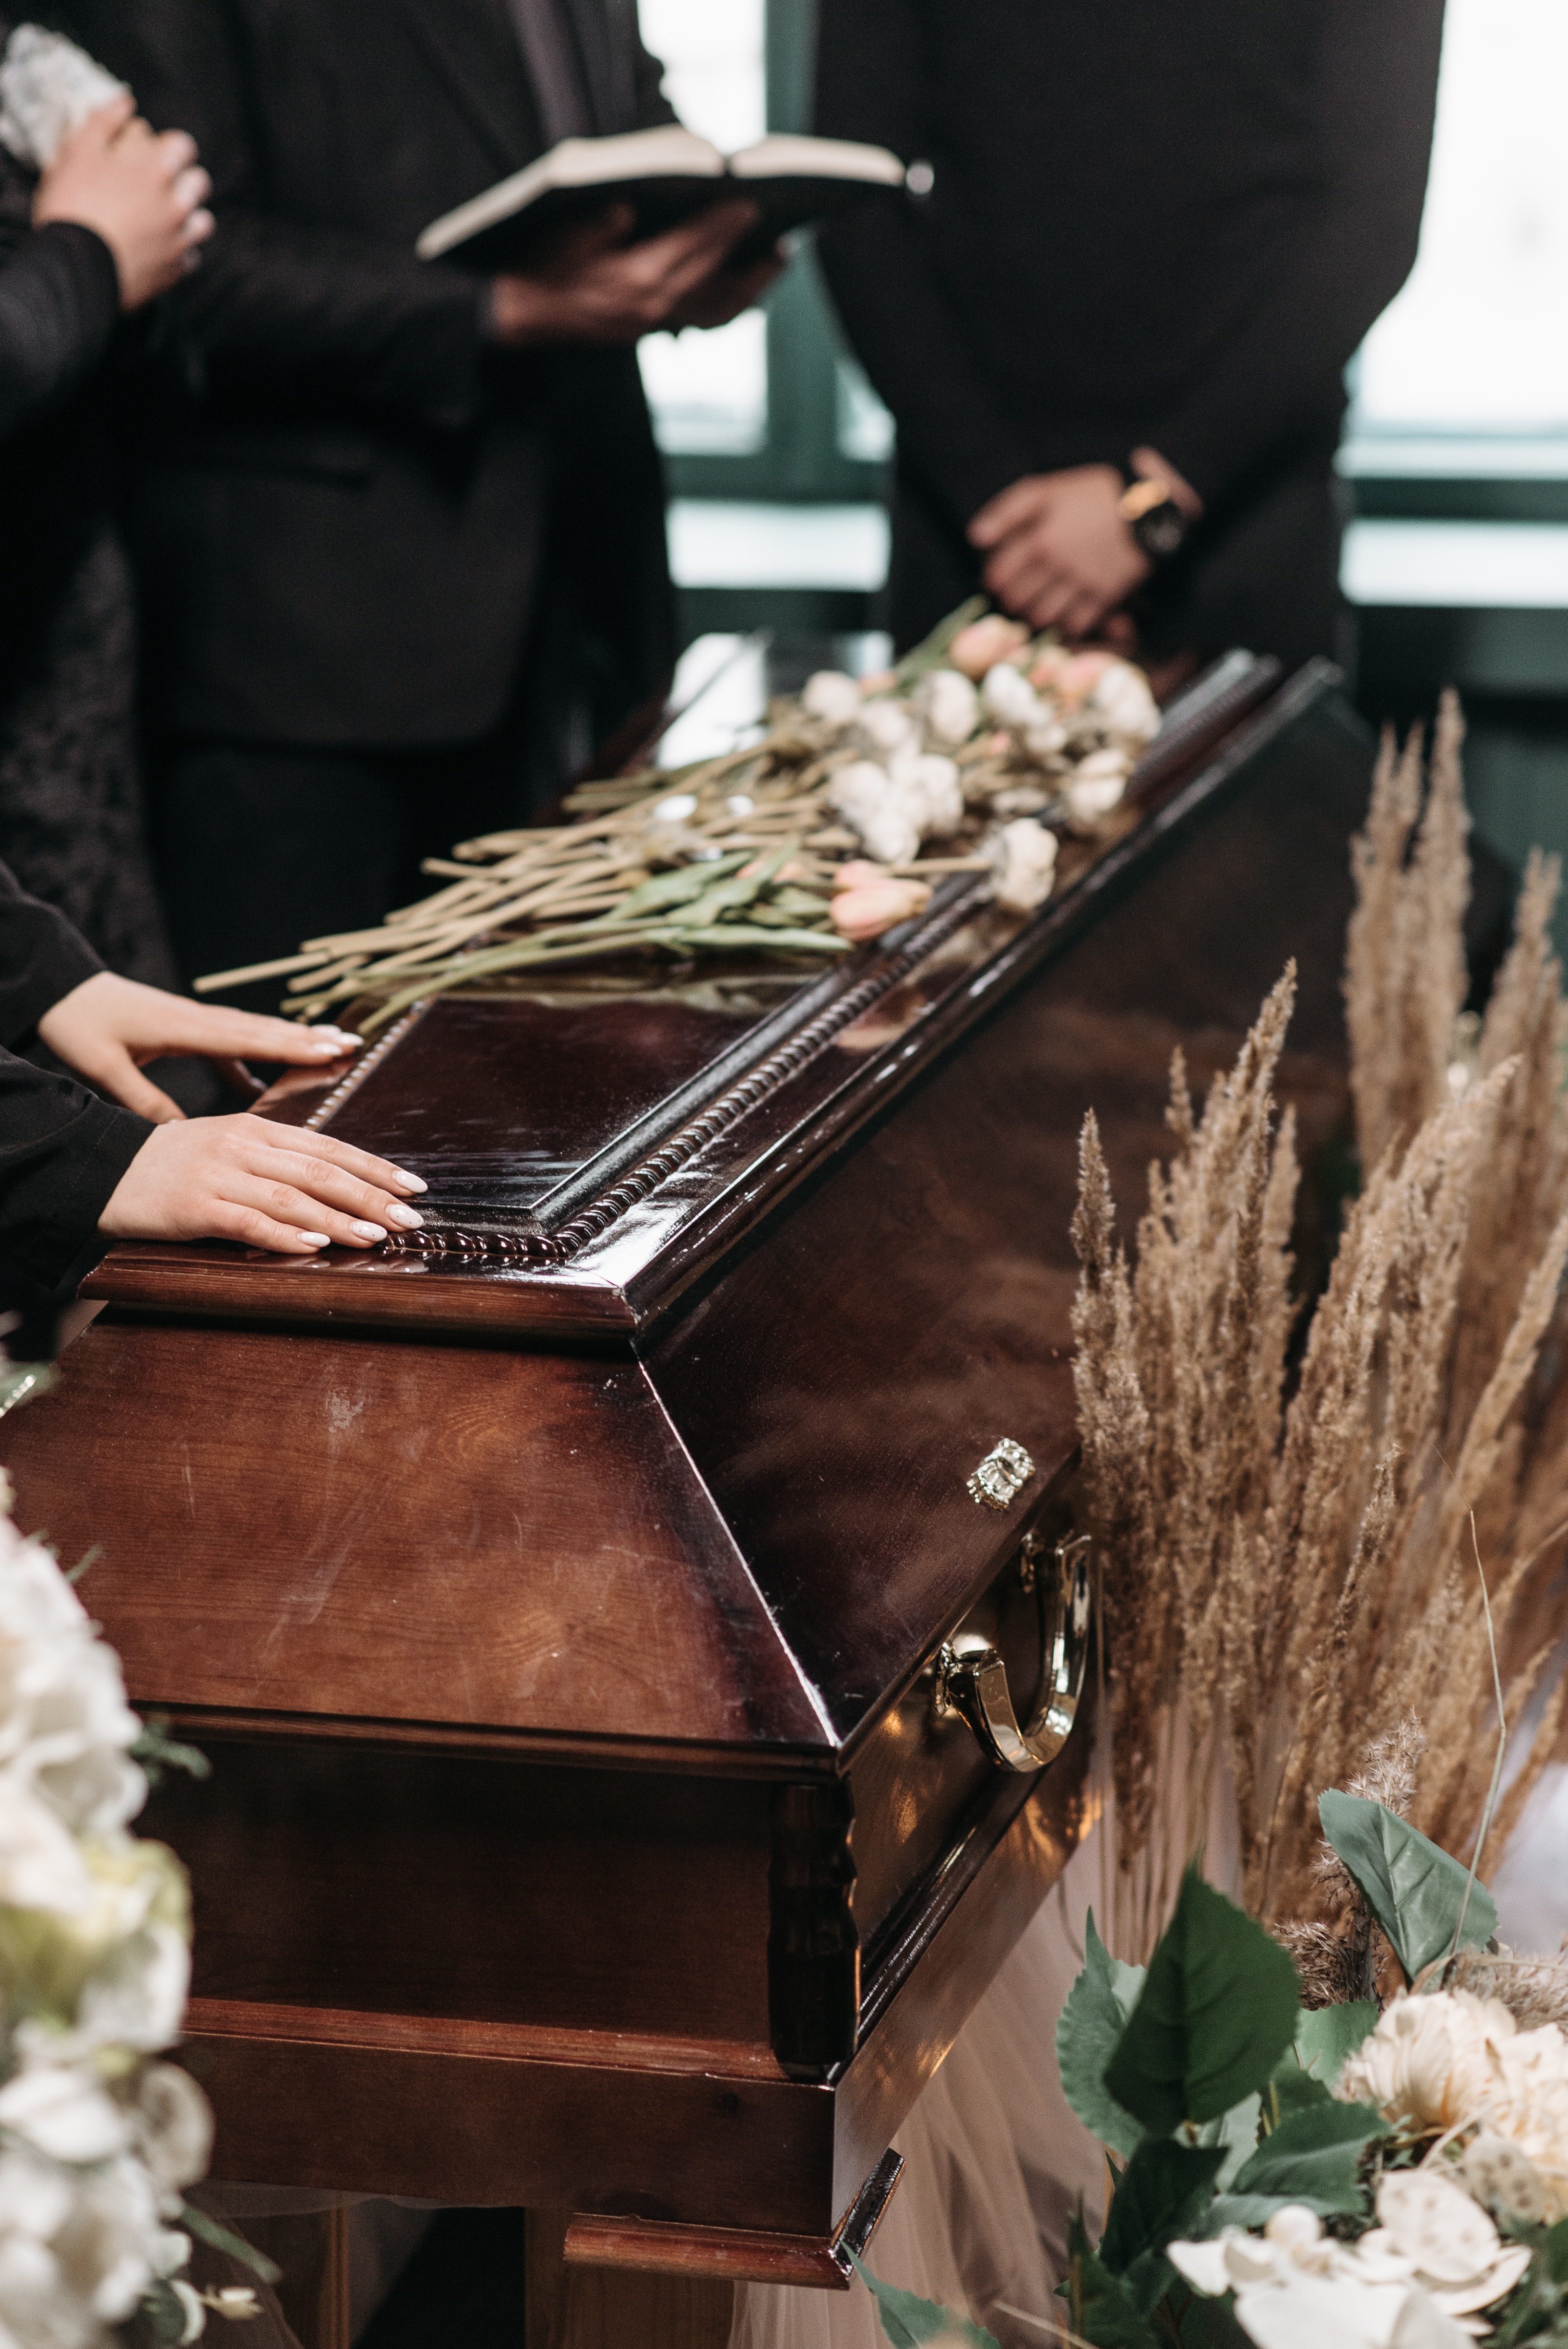 26 Things to Never Do at a Funeral or Memorial Service | Cake Blog